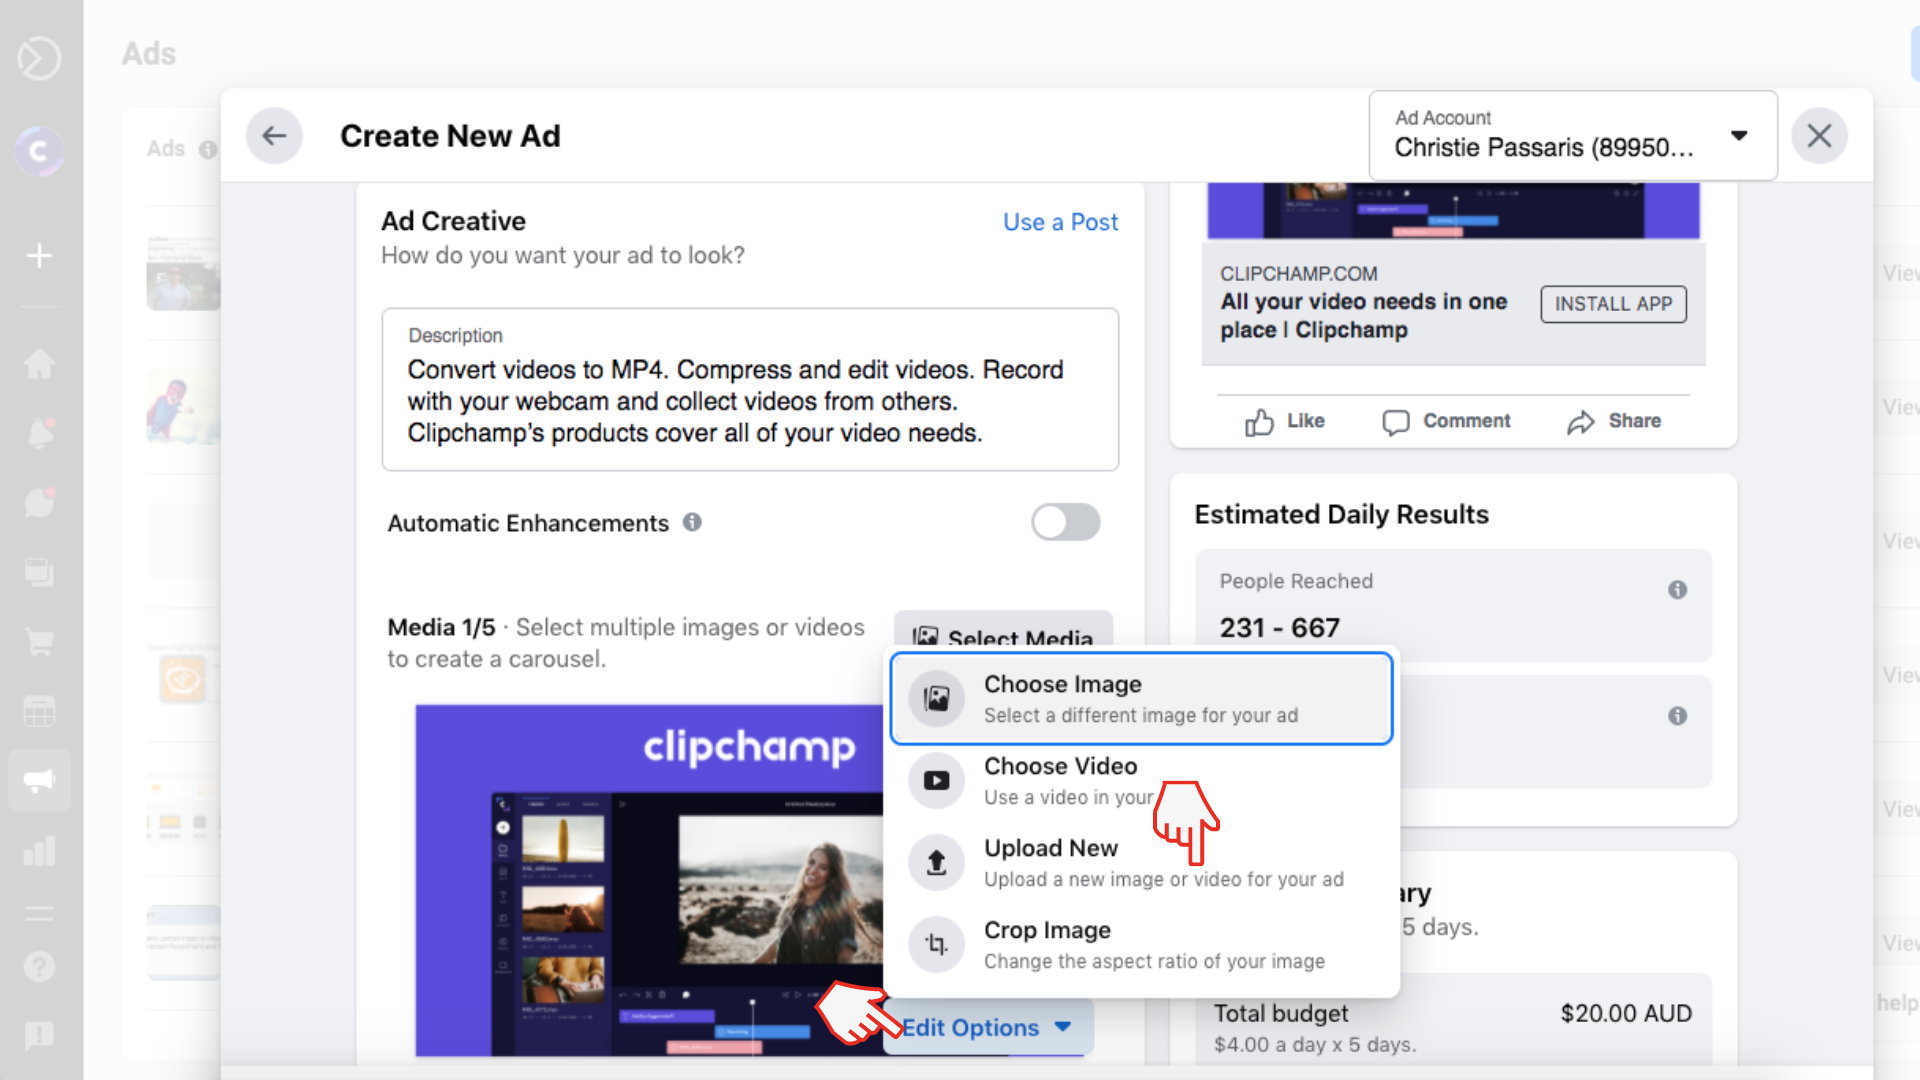 Step 4. Select Facebook ad options 
